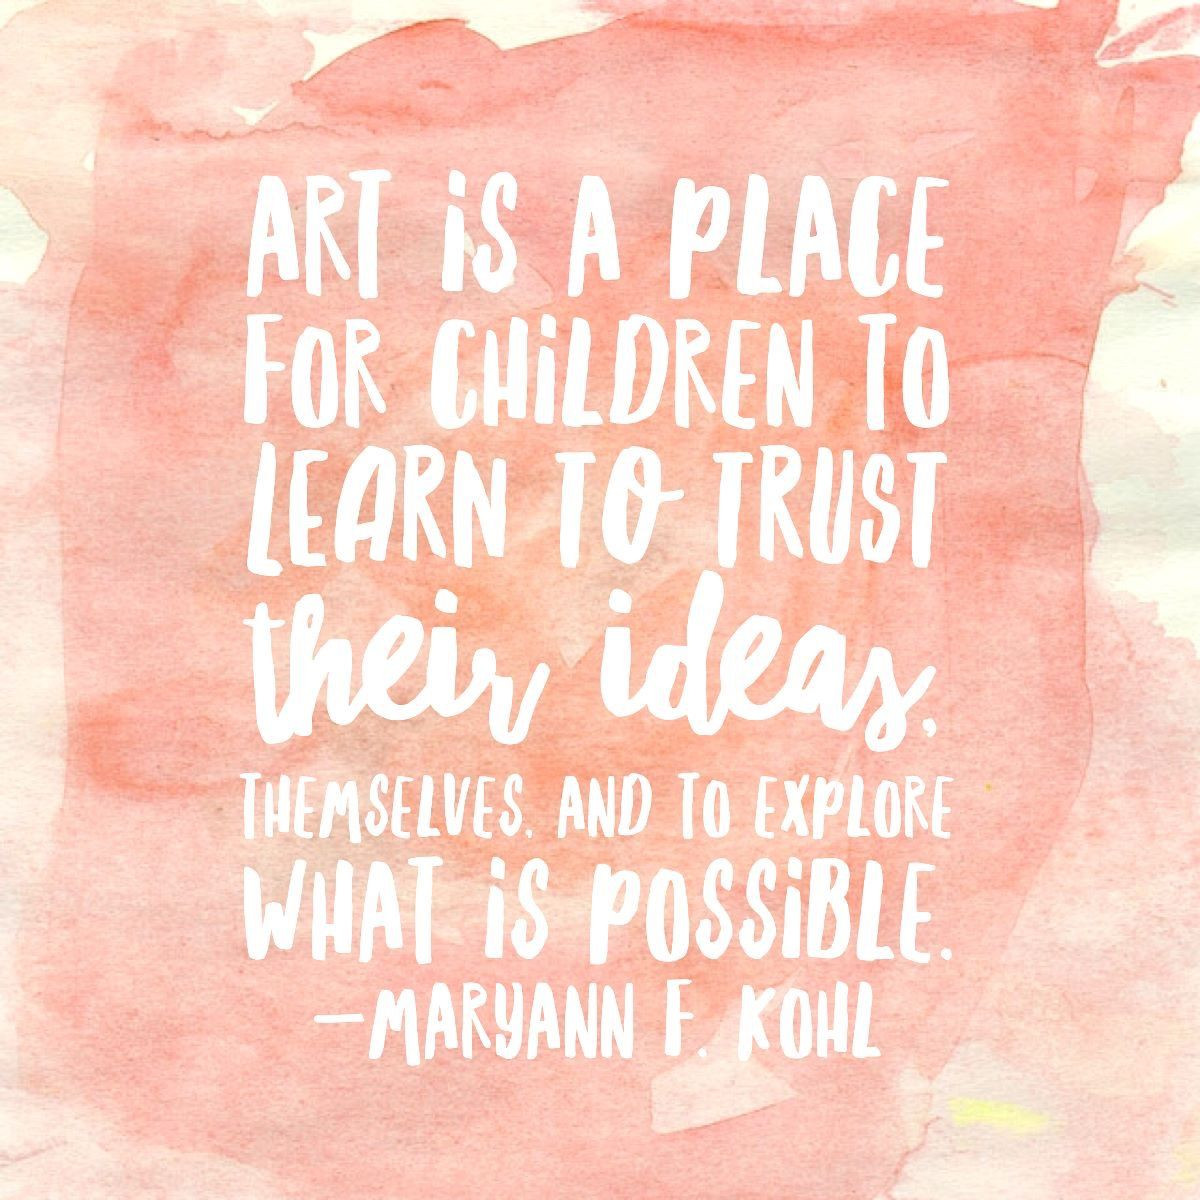 Quotes About Art Education
 "Art is a place for children to learn to trust their ideas